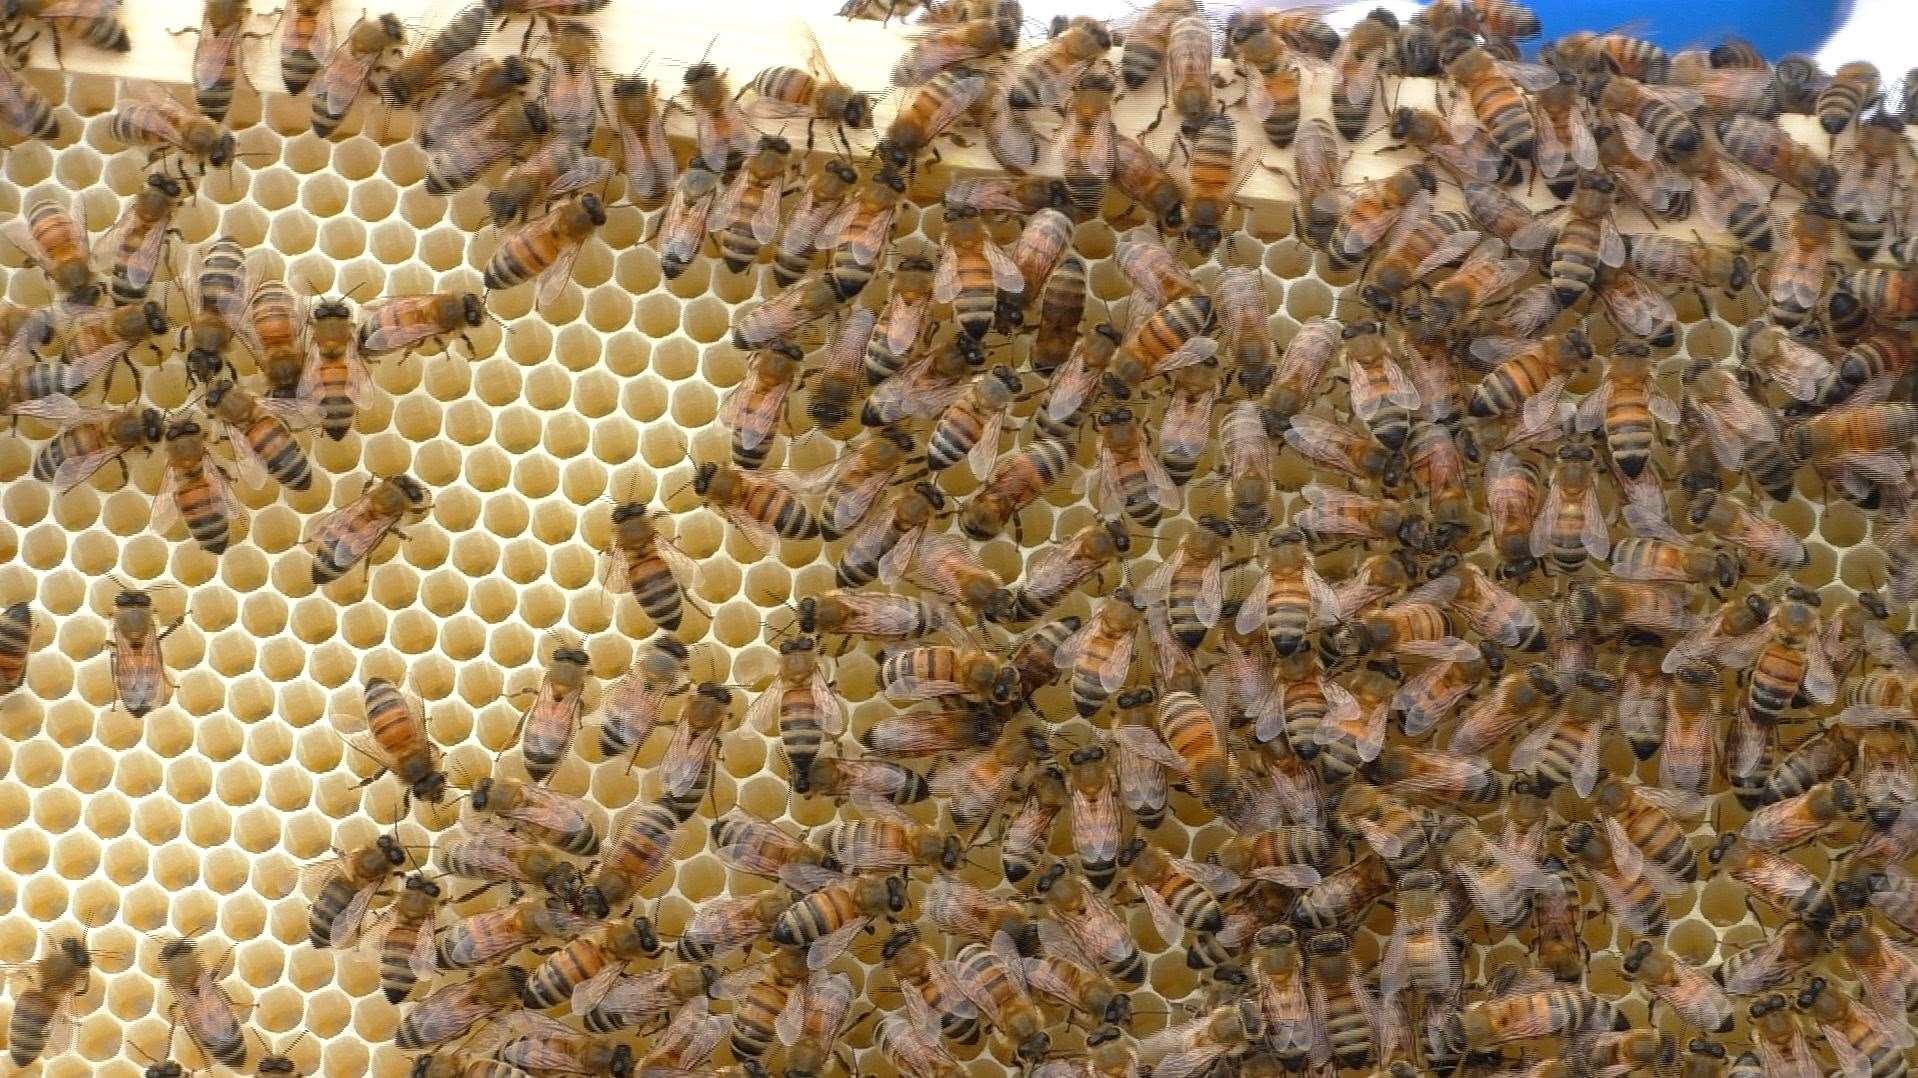 They have thousands of bees across the project